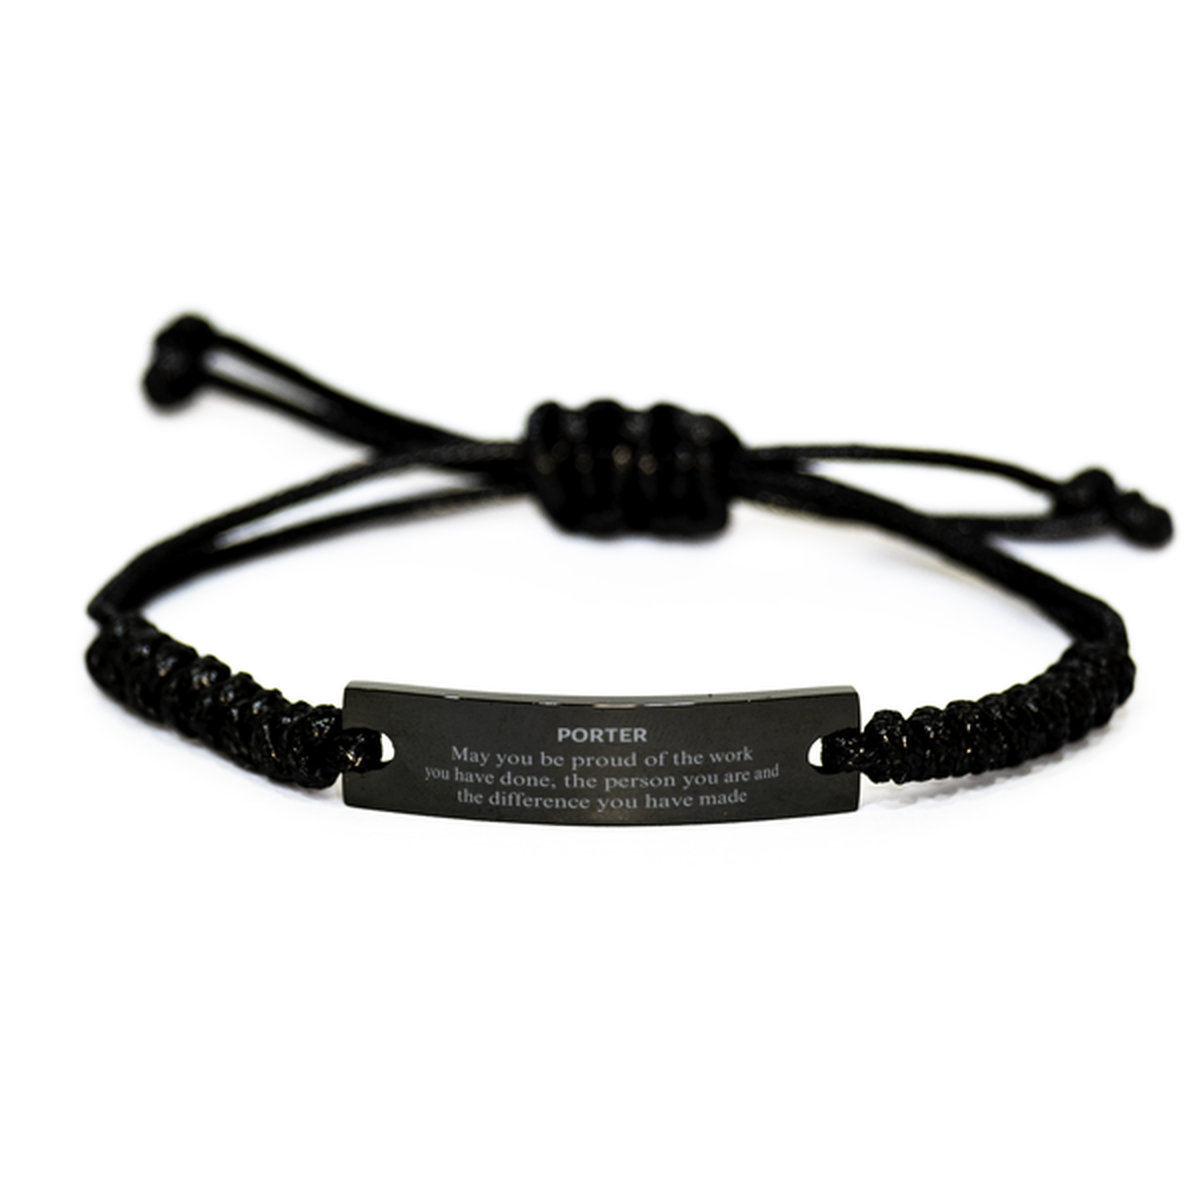 Porter May you be proud of the work you have done, Retirement Porter Black Rope Bracelet for Colleague Appreciation Gifts Amazing for Porter